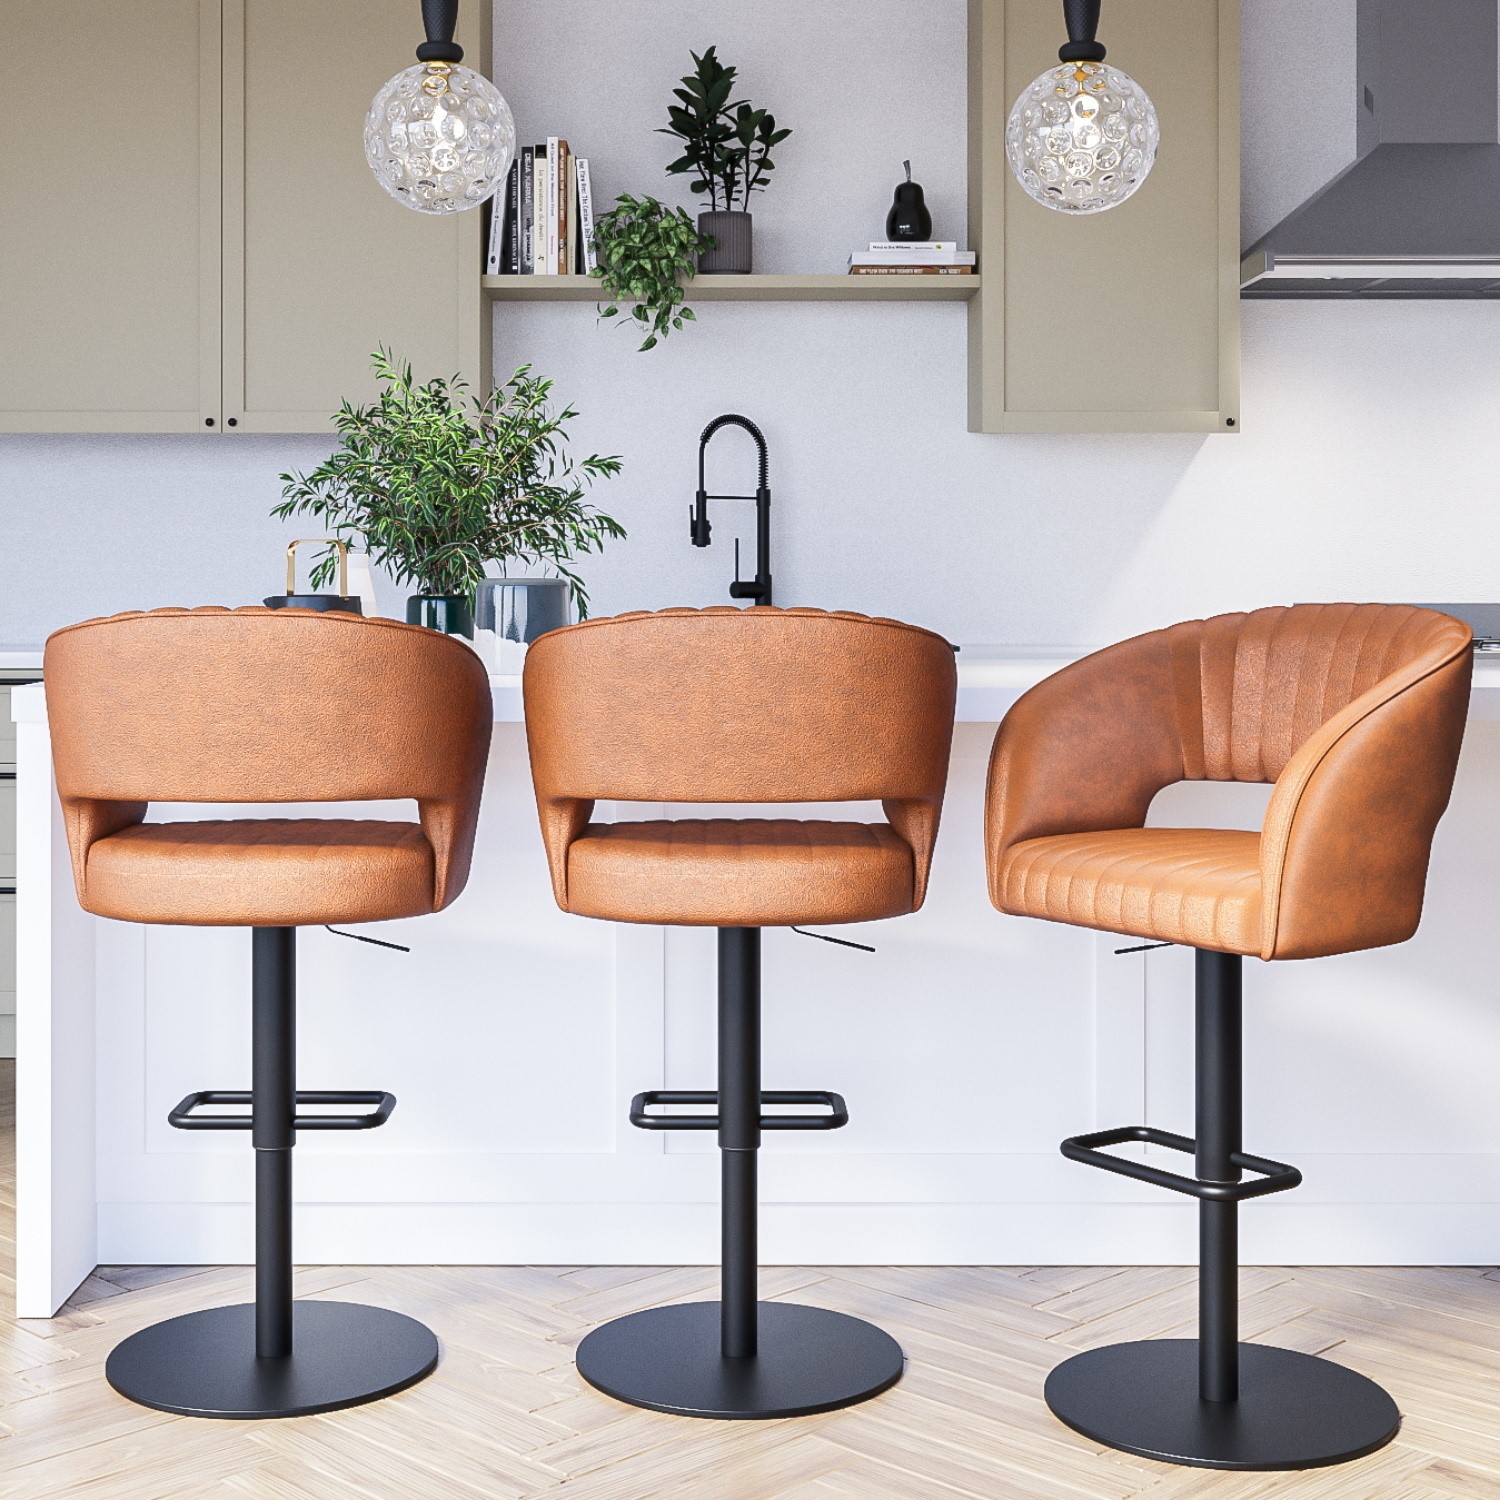 Photo of Set of 3 curved tan faux leather adjustable swivel bar stools with backs - runa